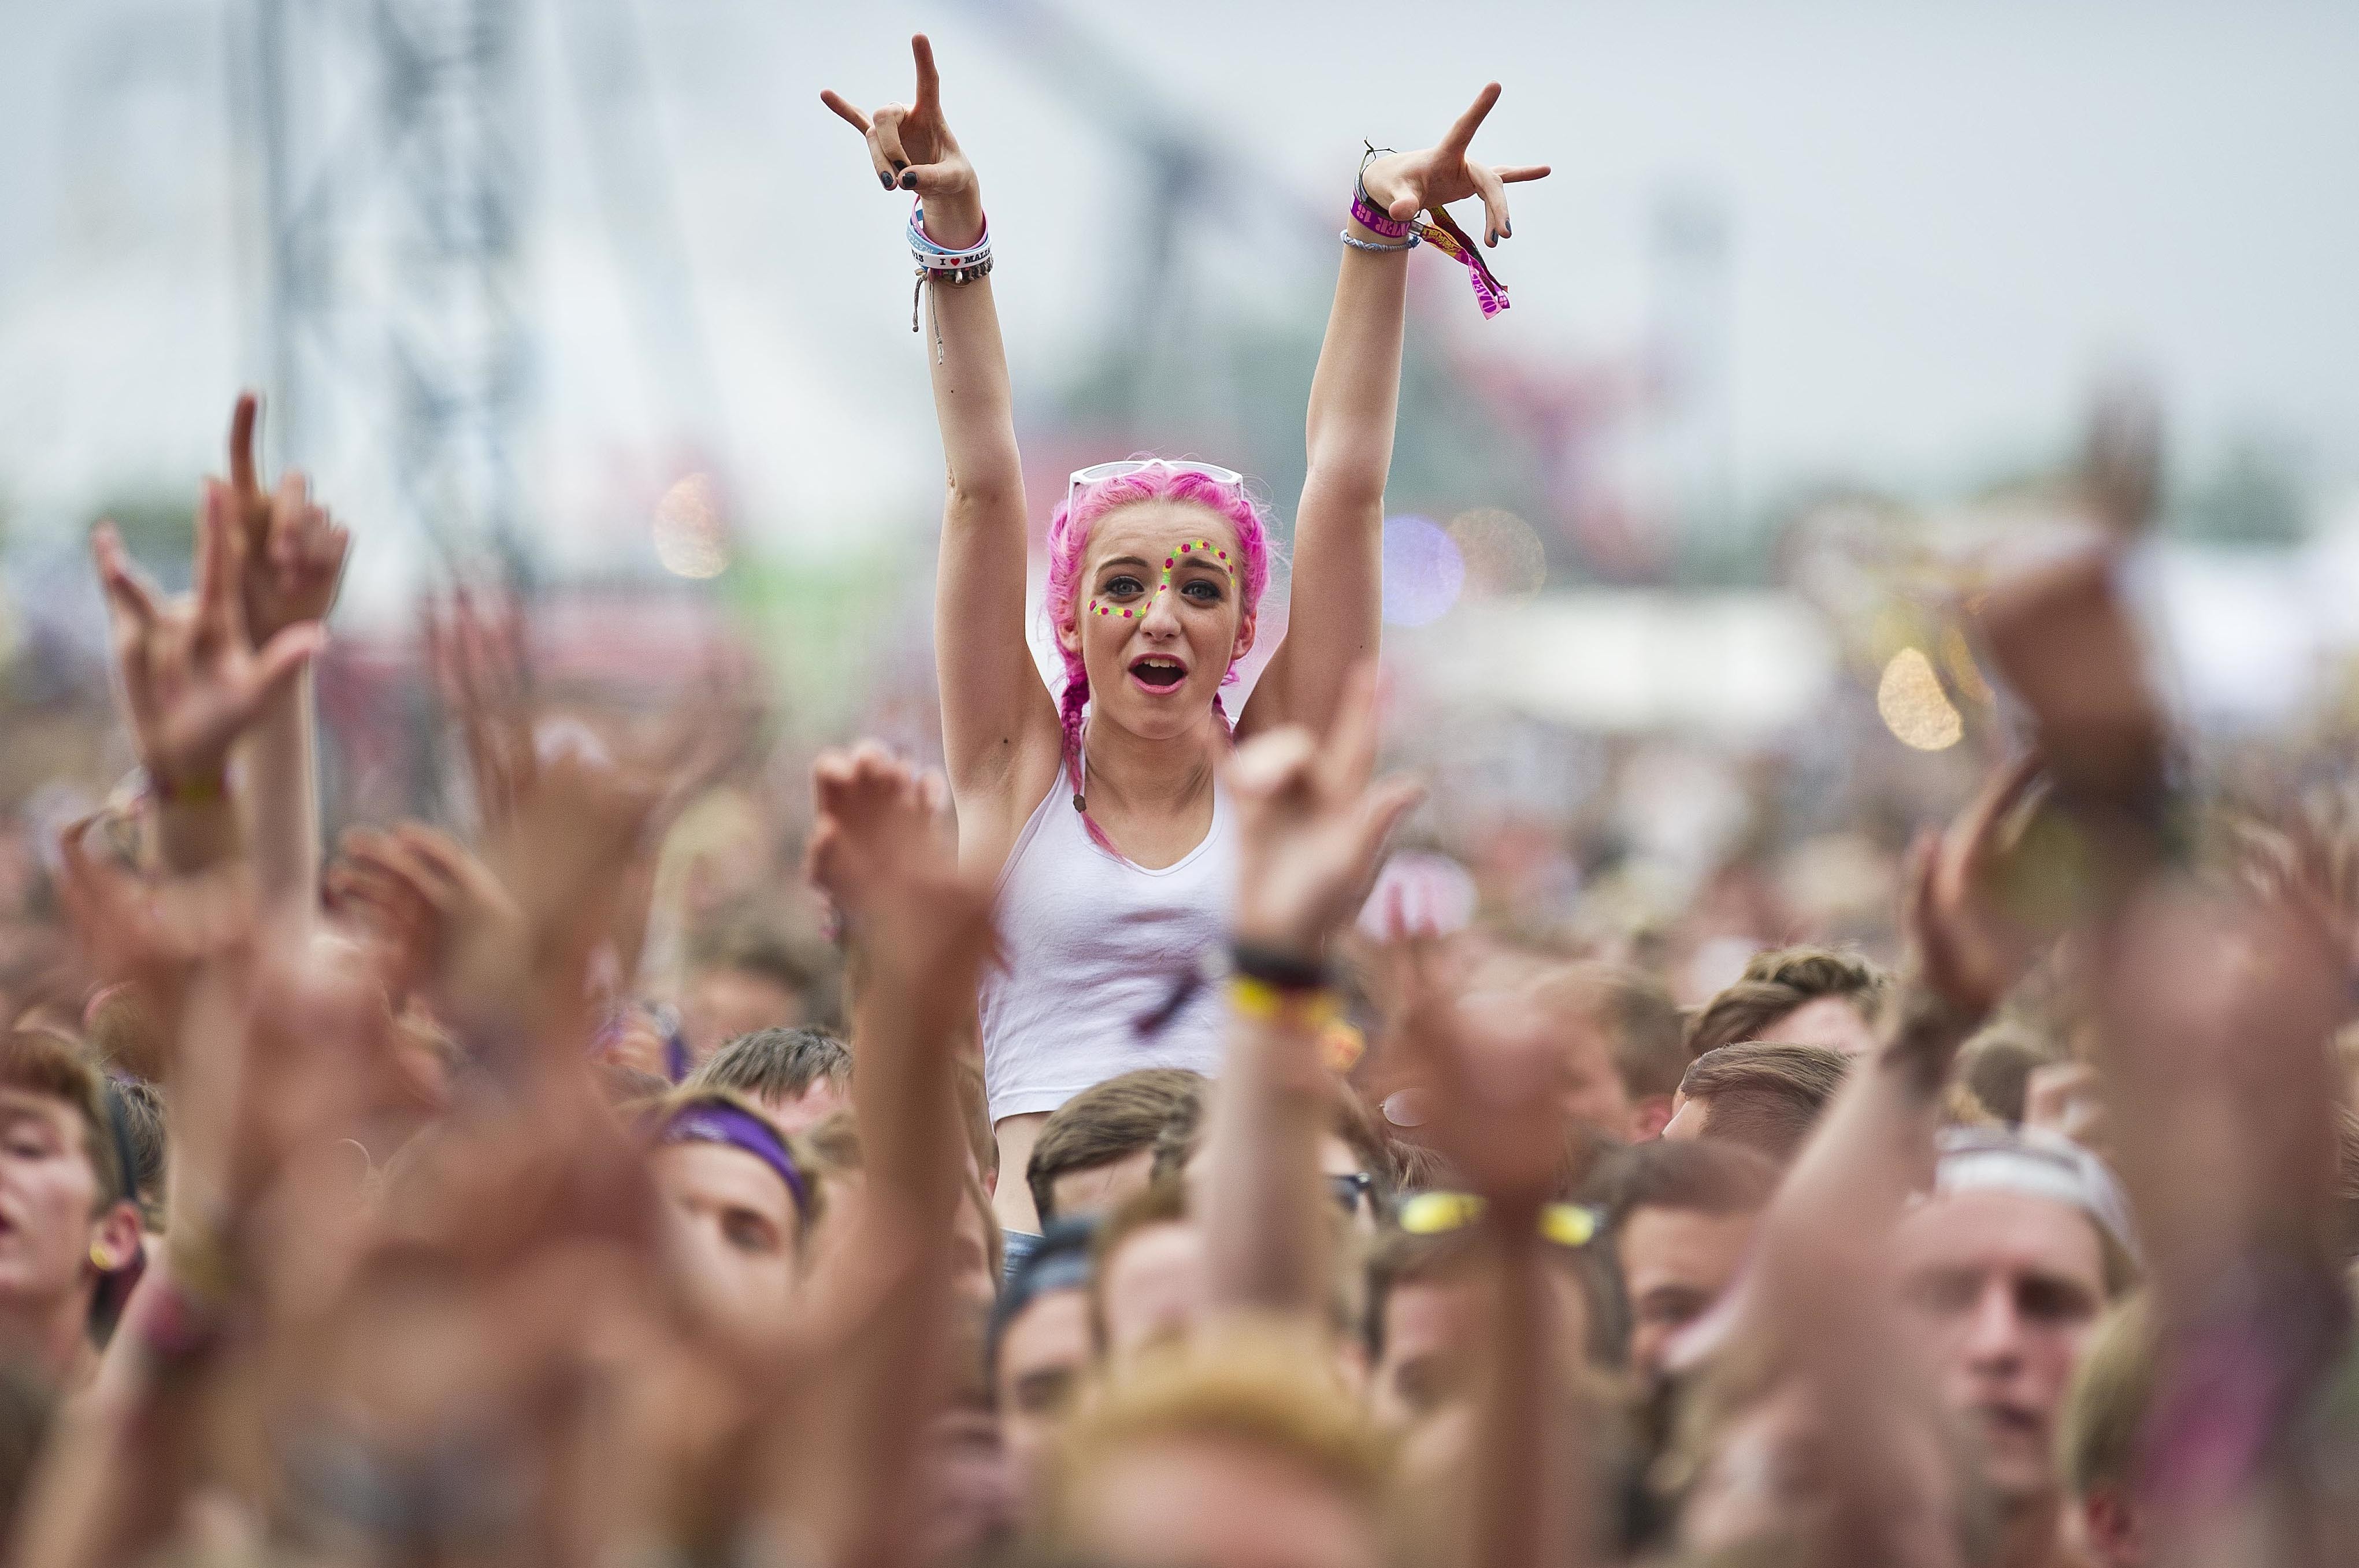 Volunteer to get into festivals for free